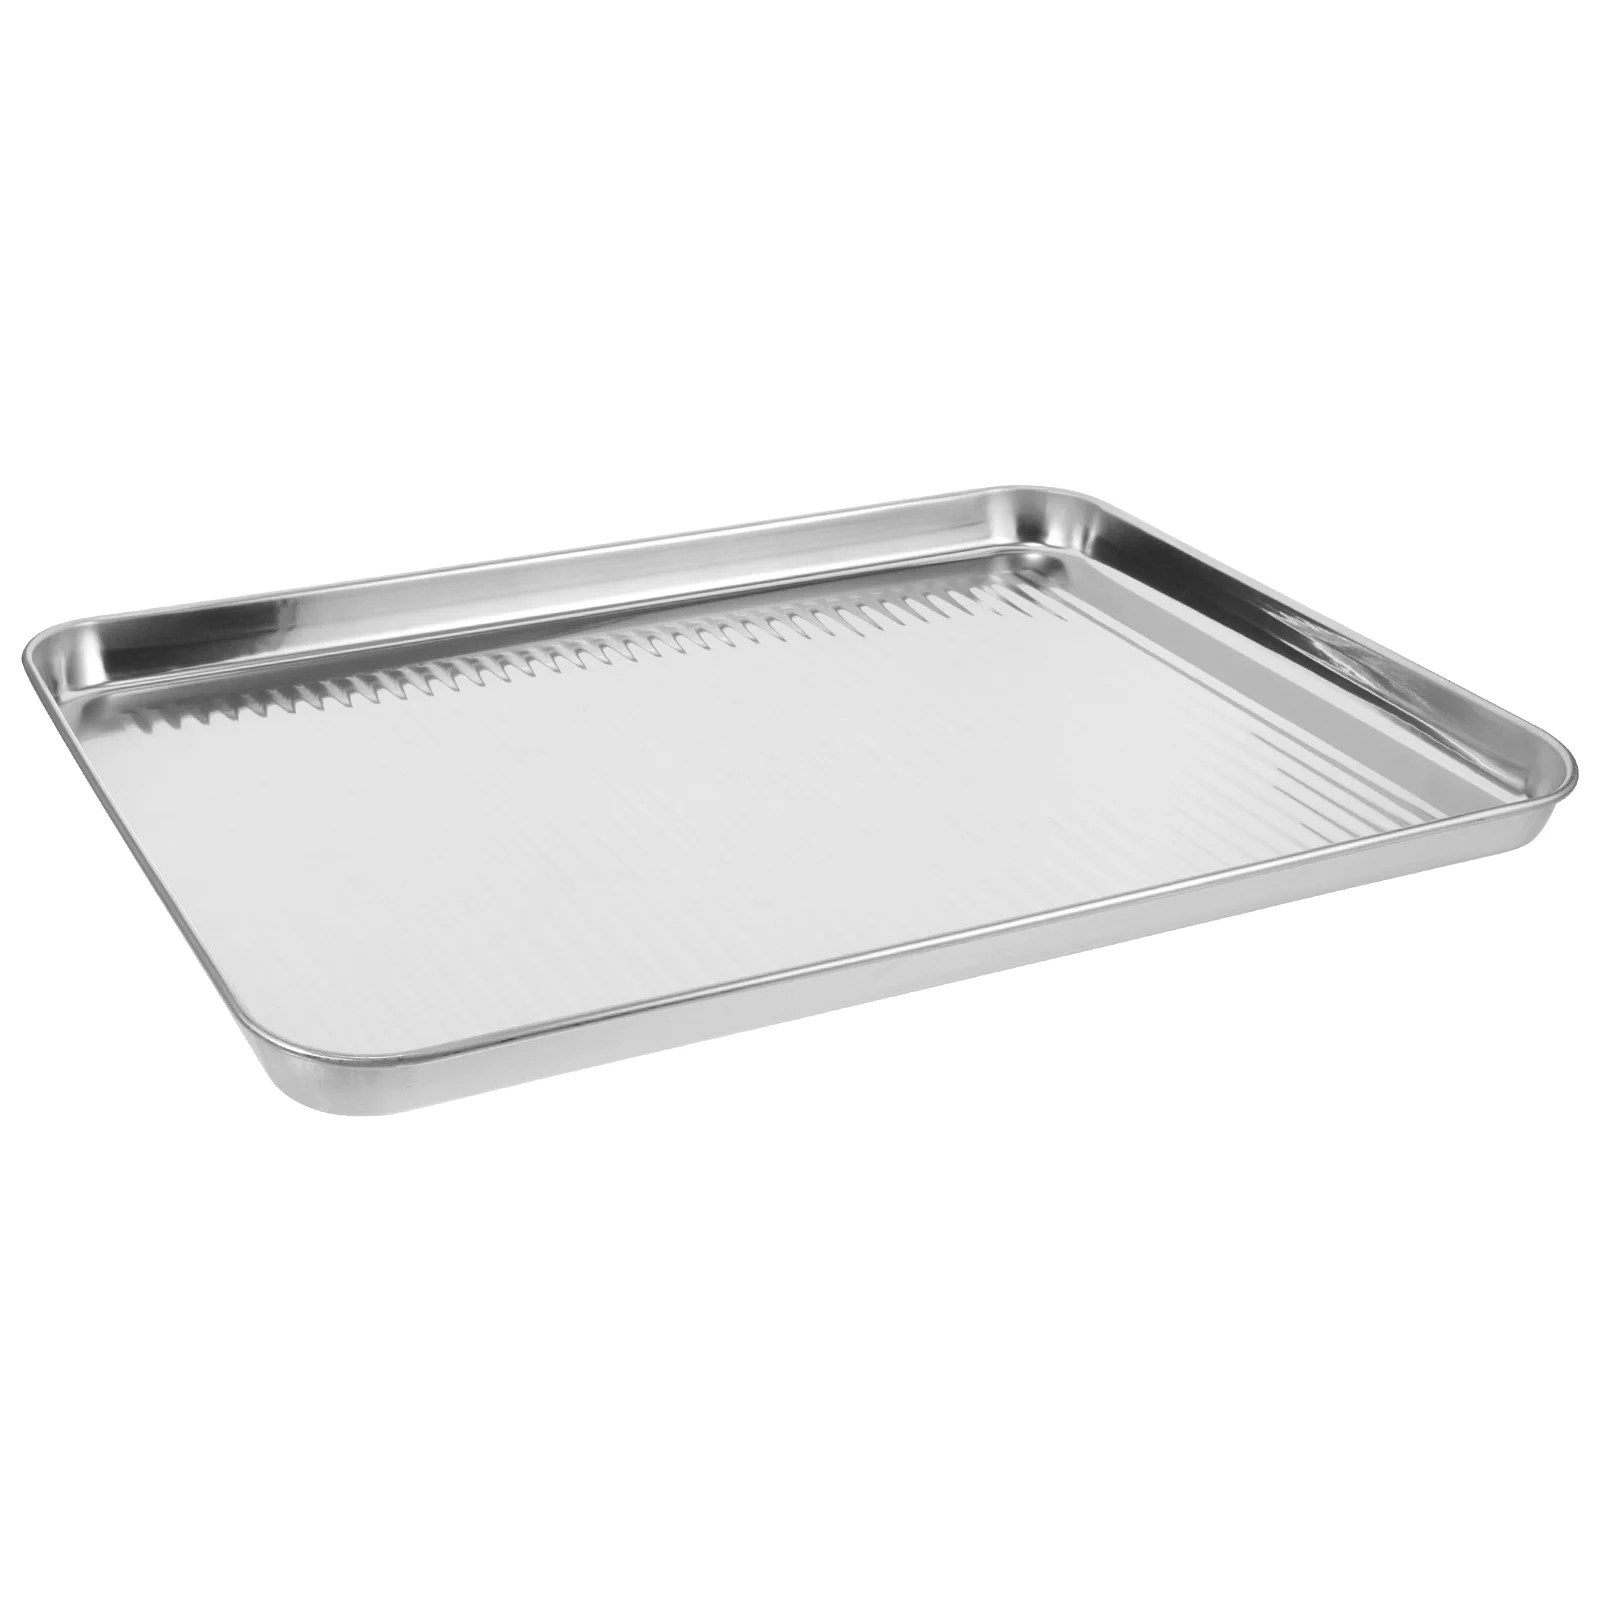 

Bakeware Nonstick Small Roasting Pan Stainless Steel Baking Sheet Cookie Molds Sheets